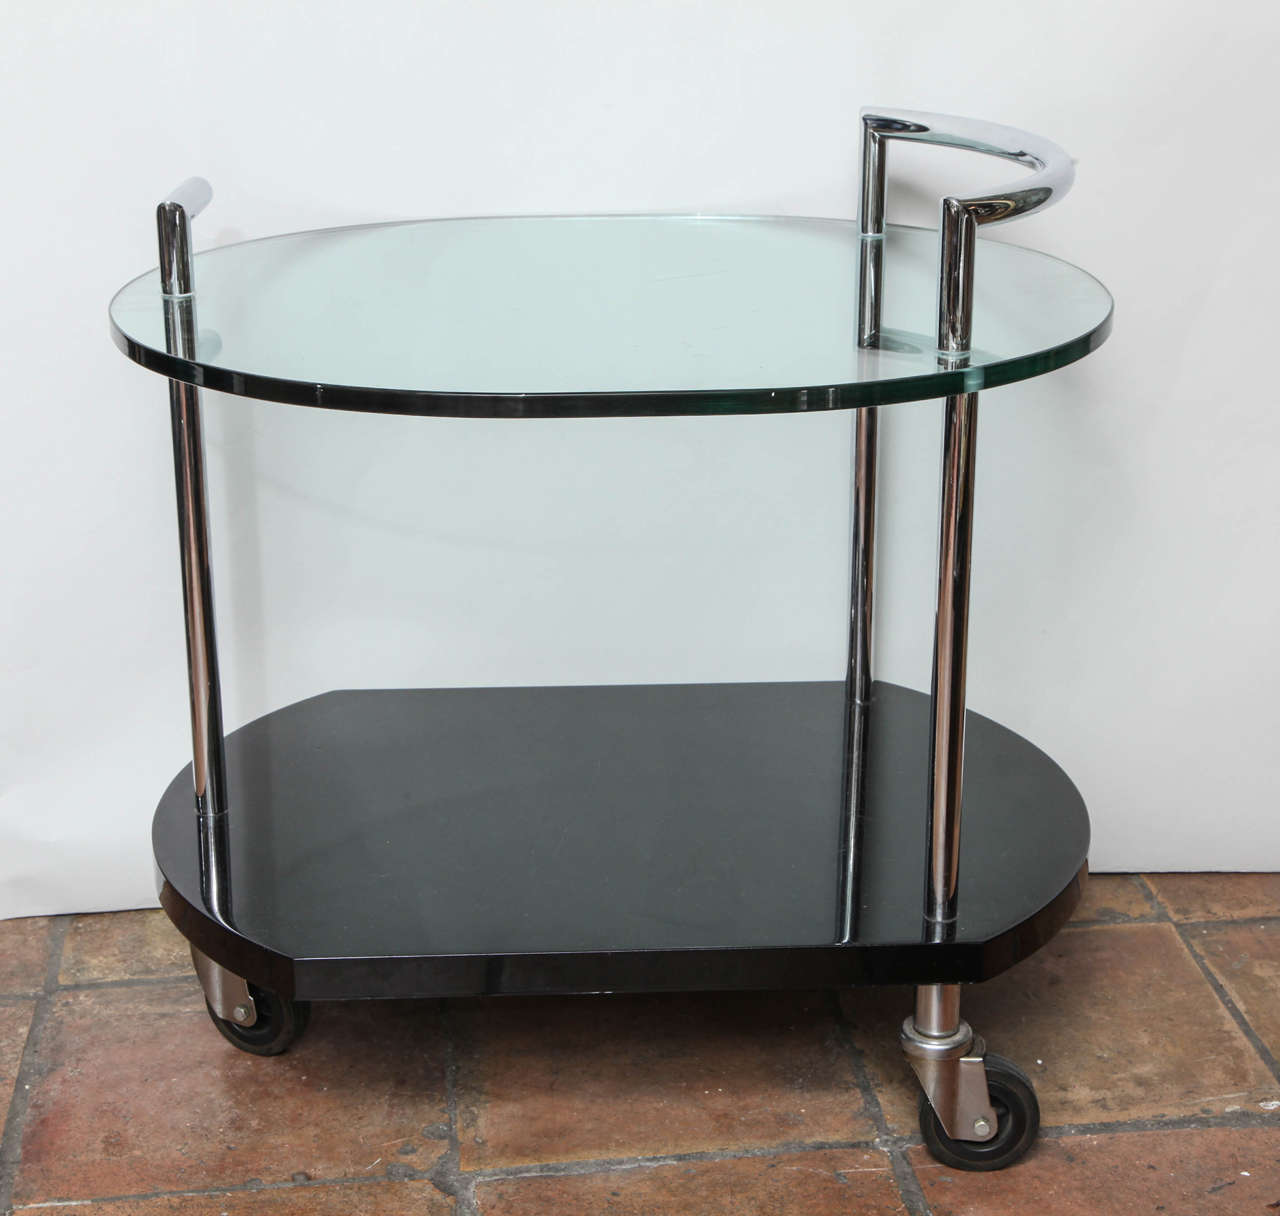 A charming and practical two-tiered modernist bar cart with nickel-plated handles over a glass shelf and a lower lacquered shelf over swivel casters.